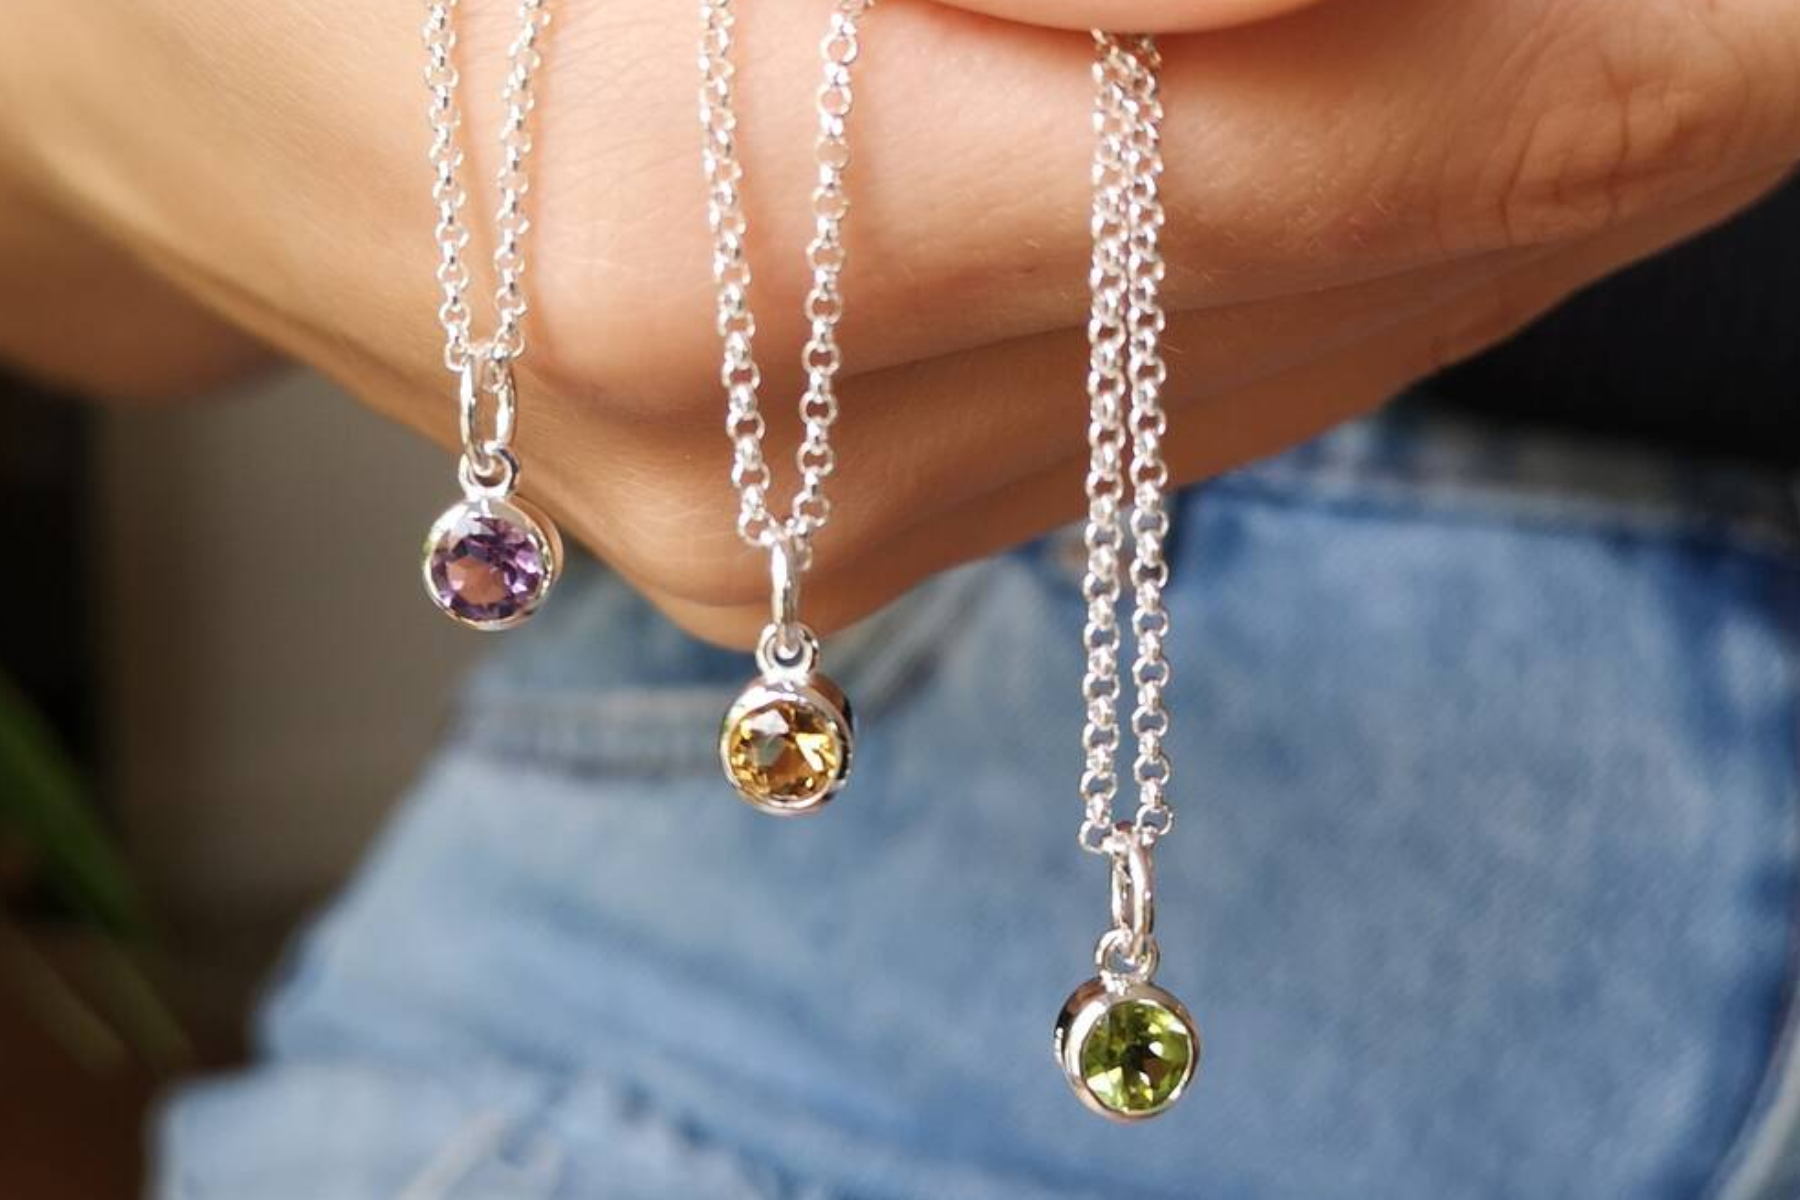 A person's hand holding three birthstone necklaces